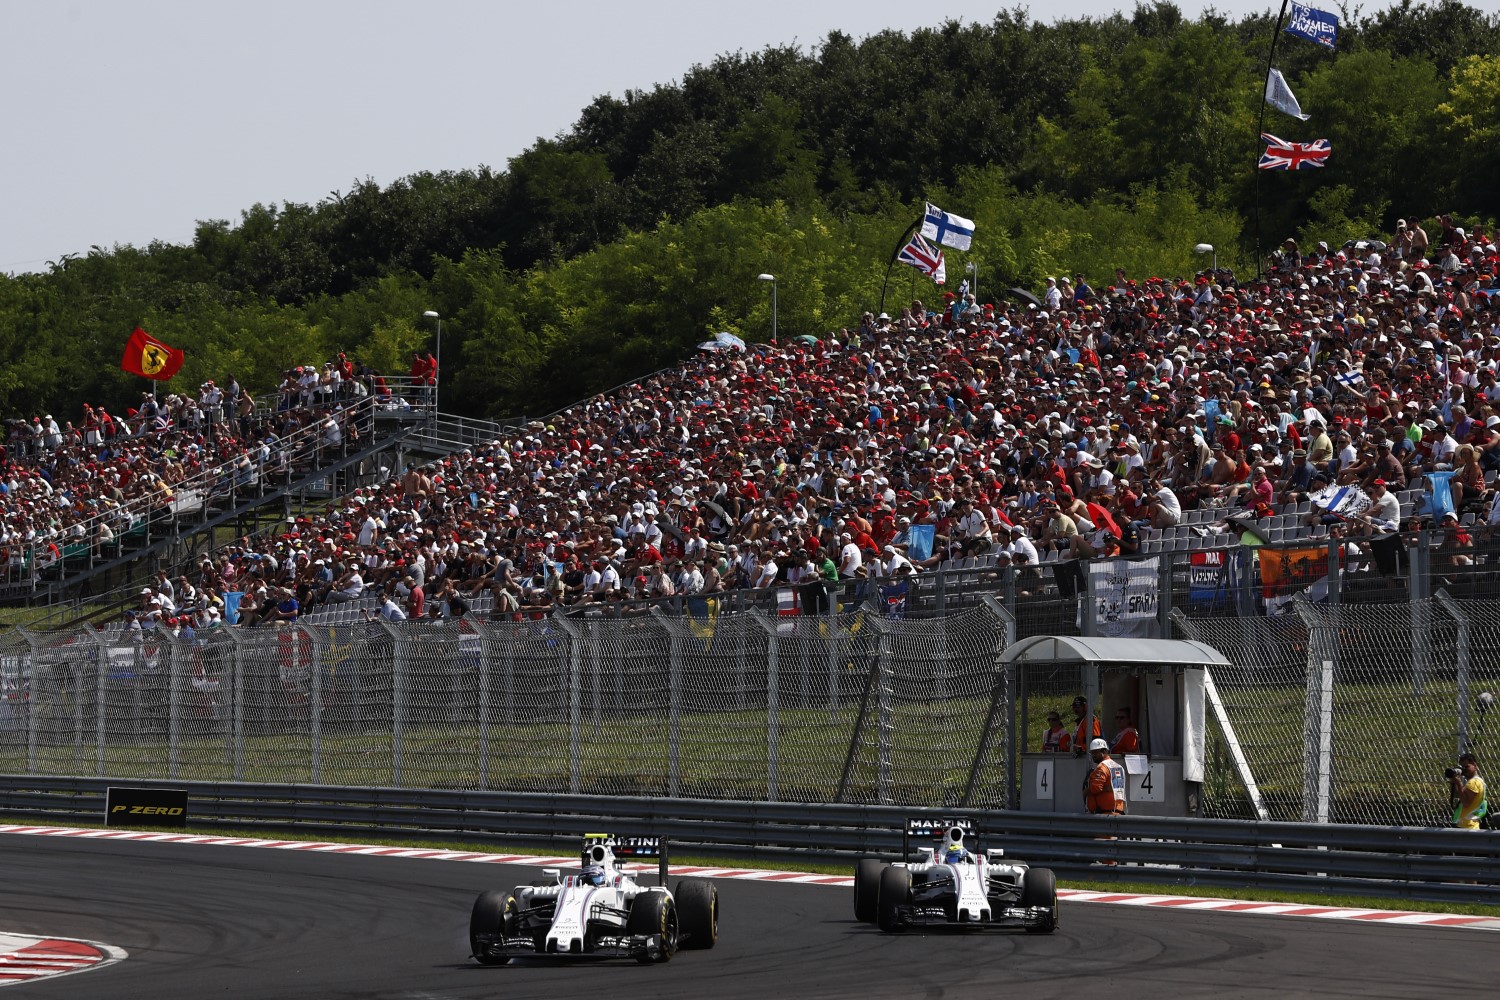 F1 attendance is stout